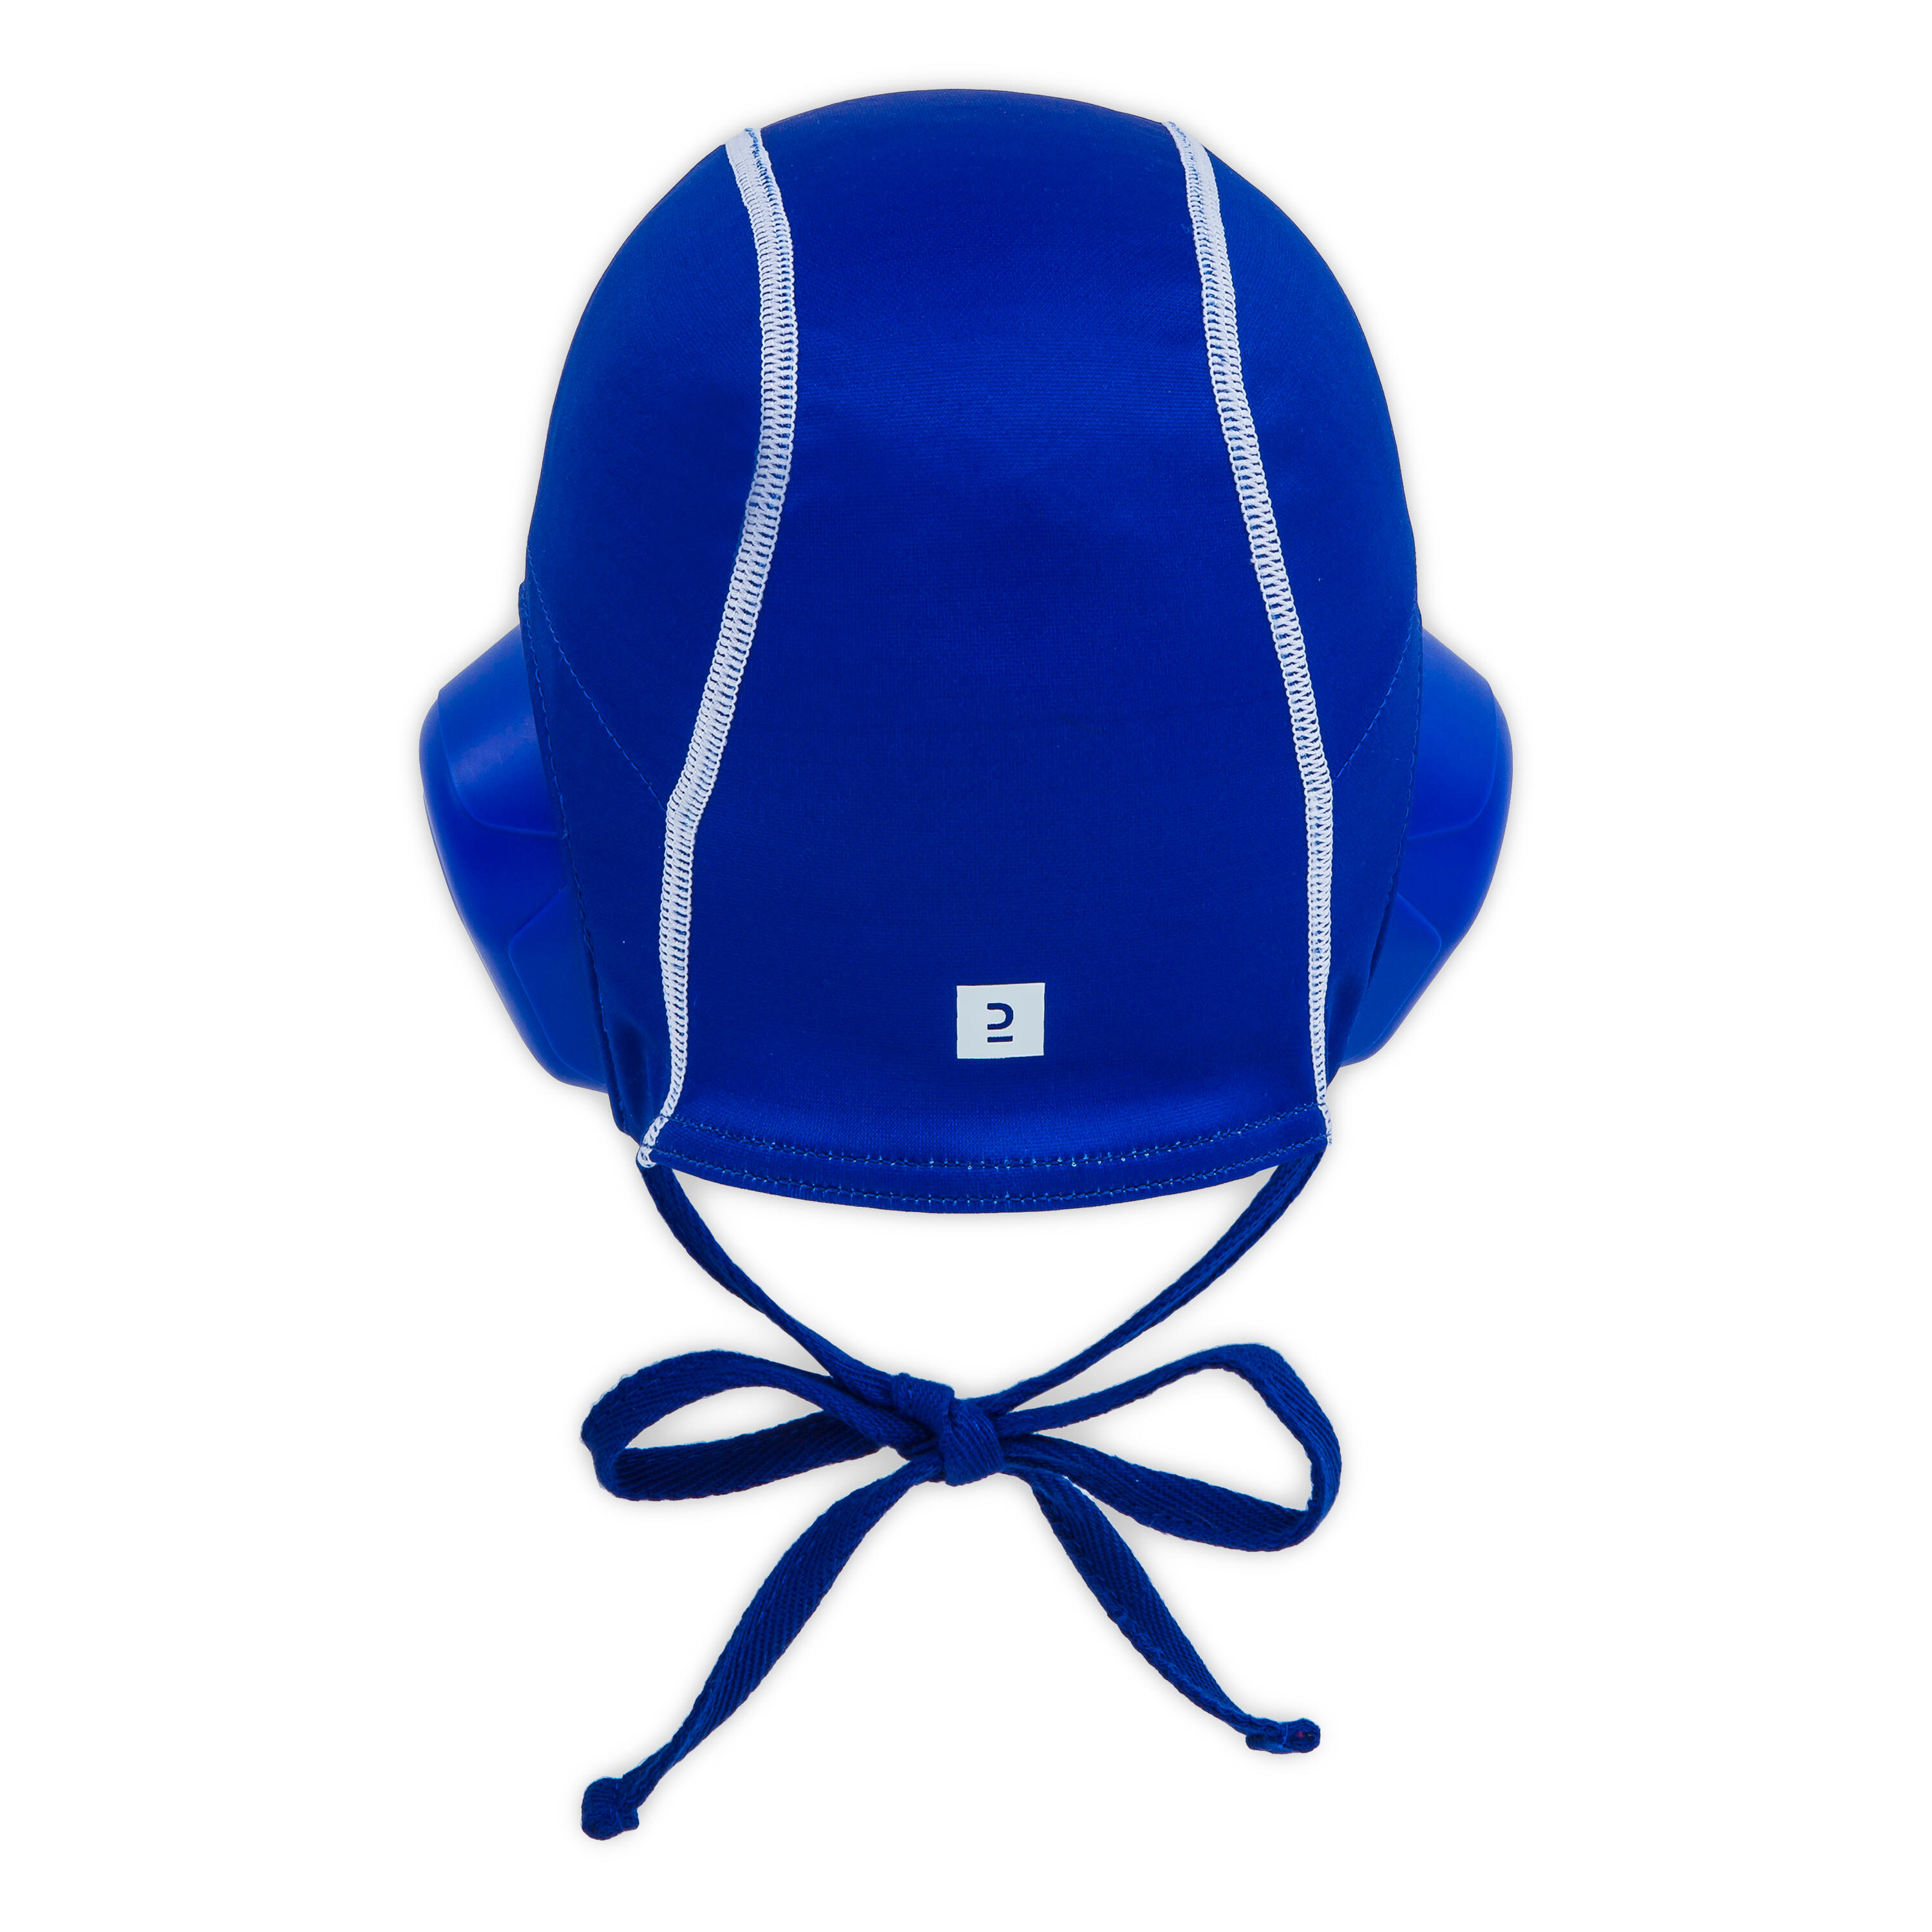 ADULT’S WATER POLO CAPS 900 SET OF 13 - BLUE 6/7